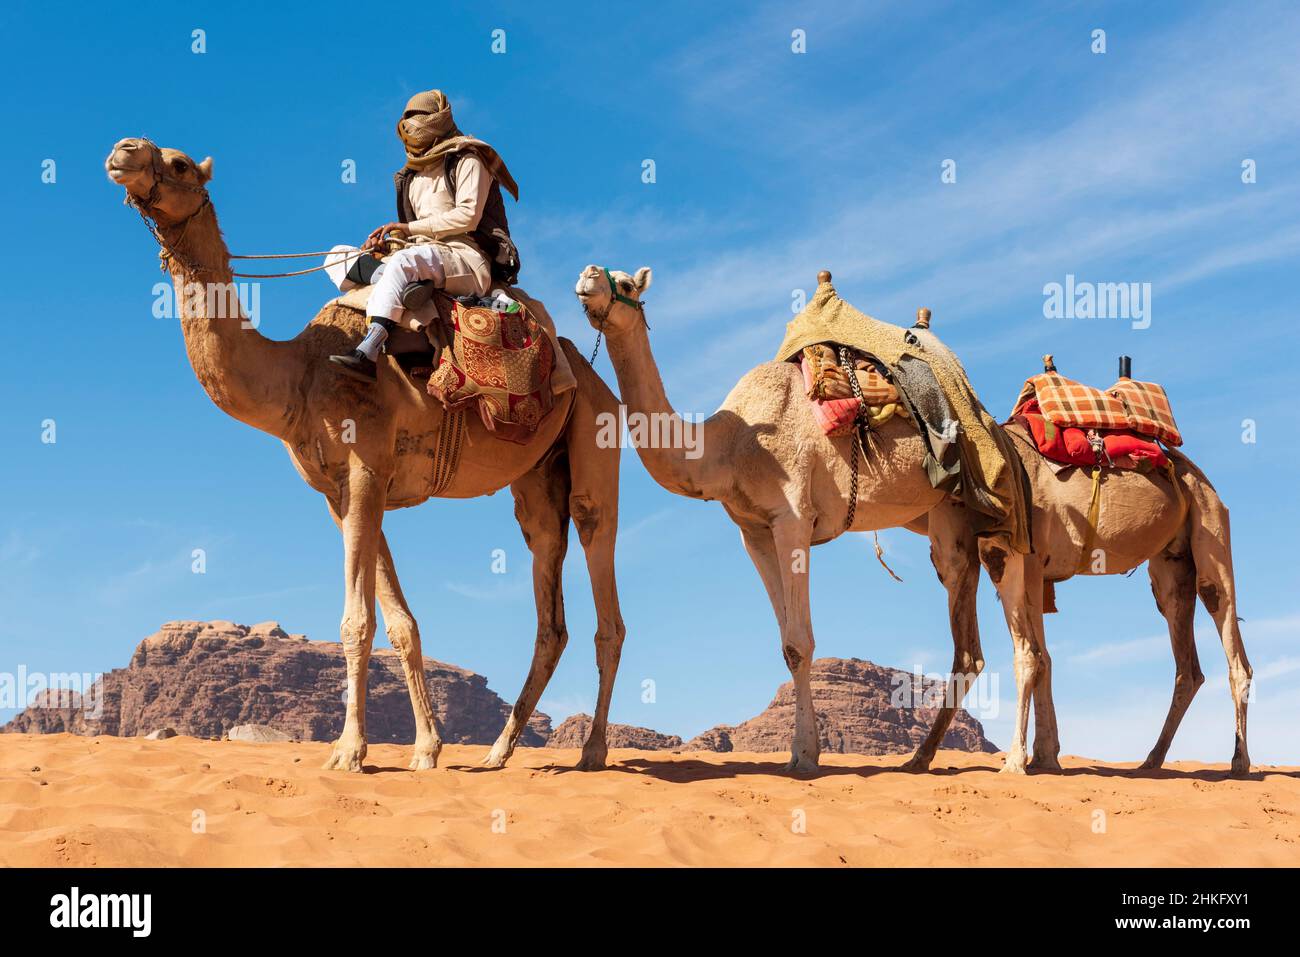 Jordan, Aqaba Governorate, Wadi Rum, listed as World Heritage by UNESCO, desert, bedouin and his camels Stock Photo